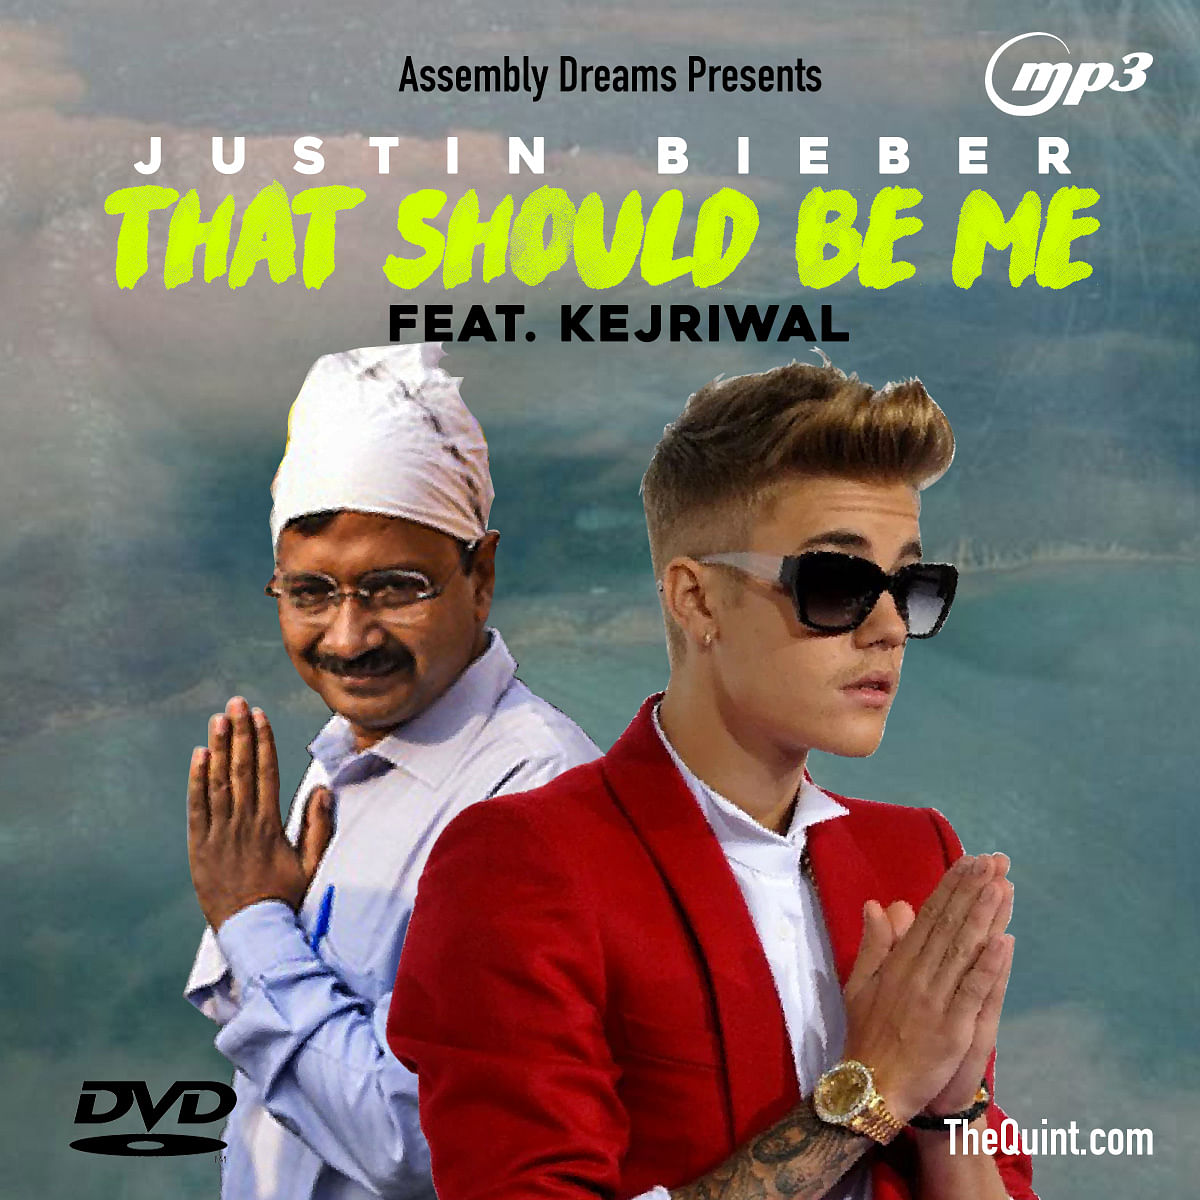 Justin Bieber is coming to India, and he should sing these songs for Rahul-Akhilesh, AAP, Badals, Mayawati & BJP!